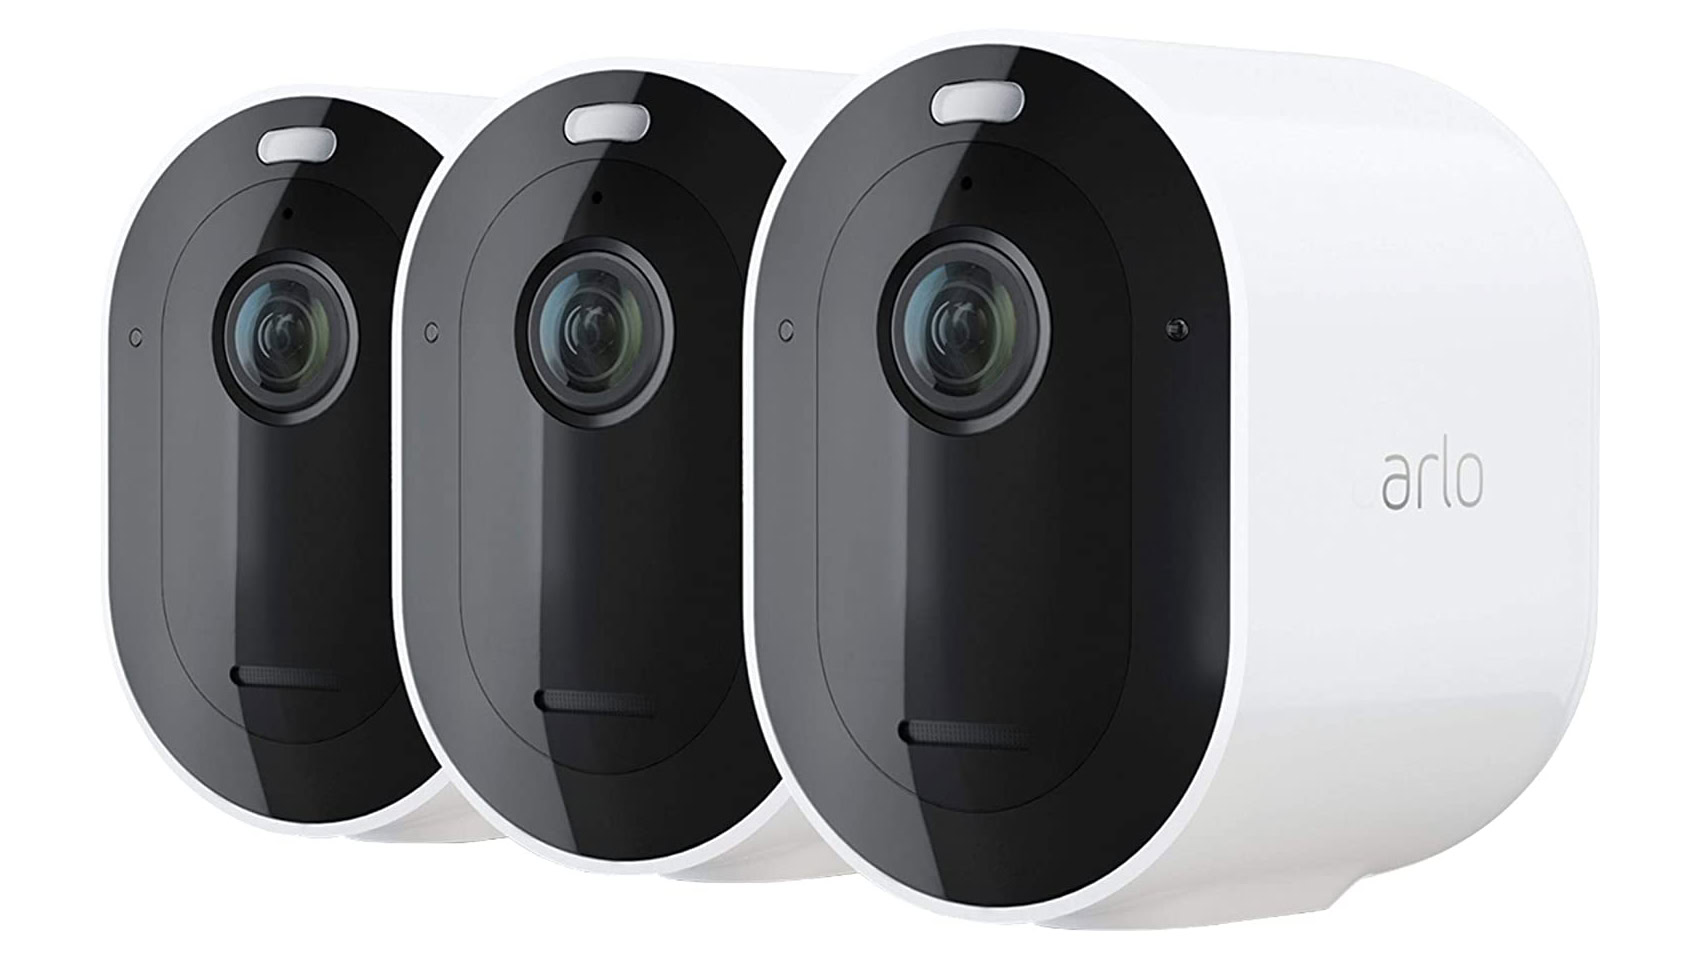 Arlo Pro 4 The best security cameras